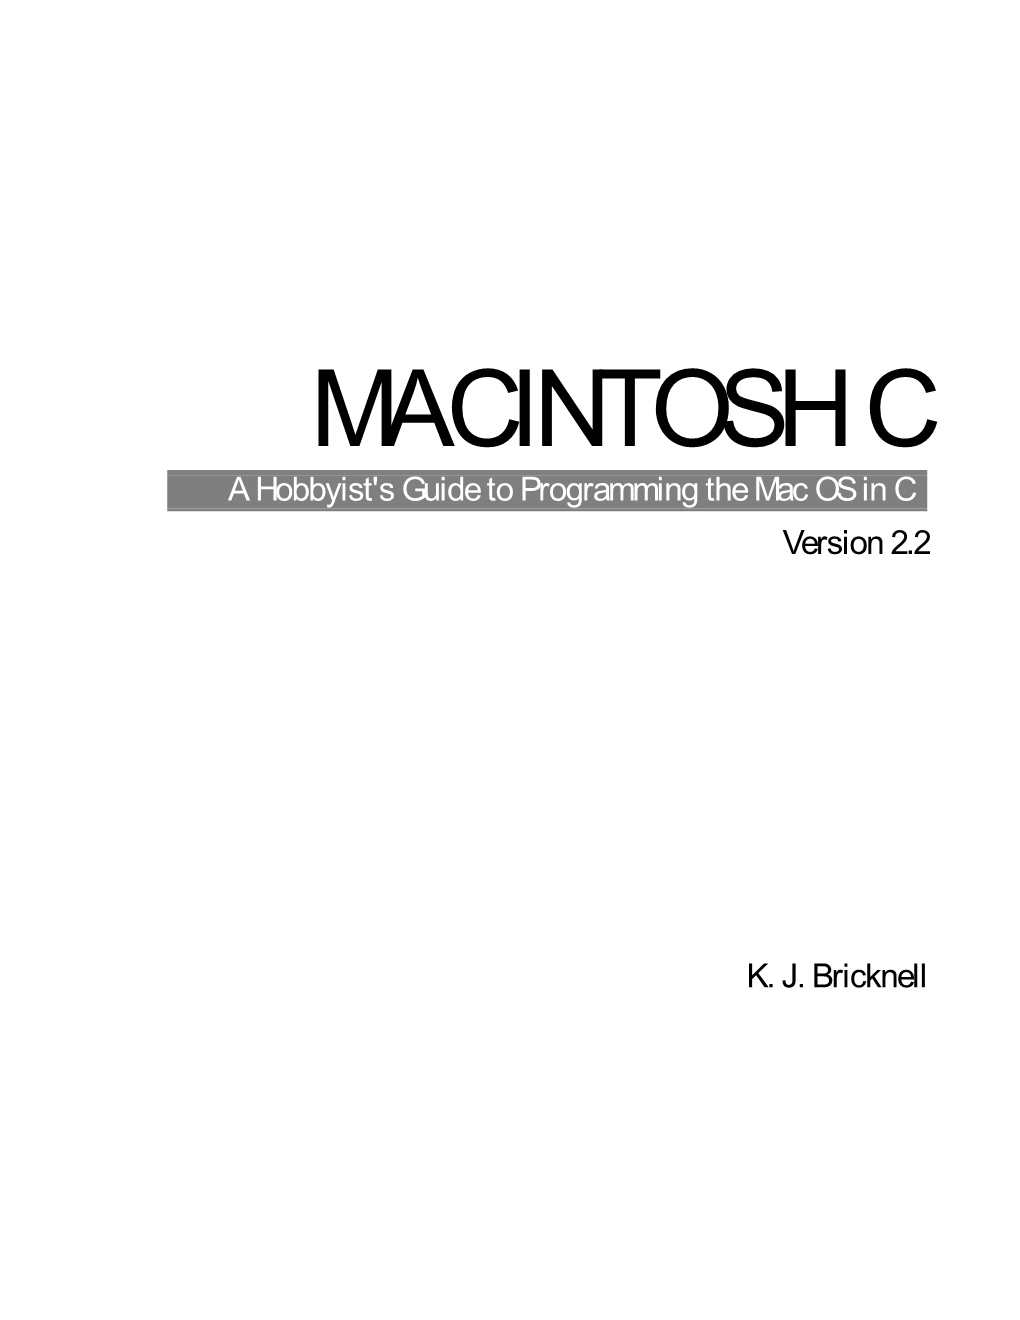 MACINTOSH C a Hobbyist's Guide to Programming the Mac OS in C Version 2.2